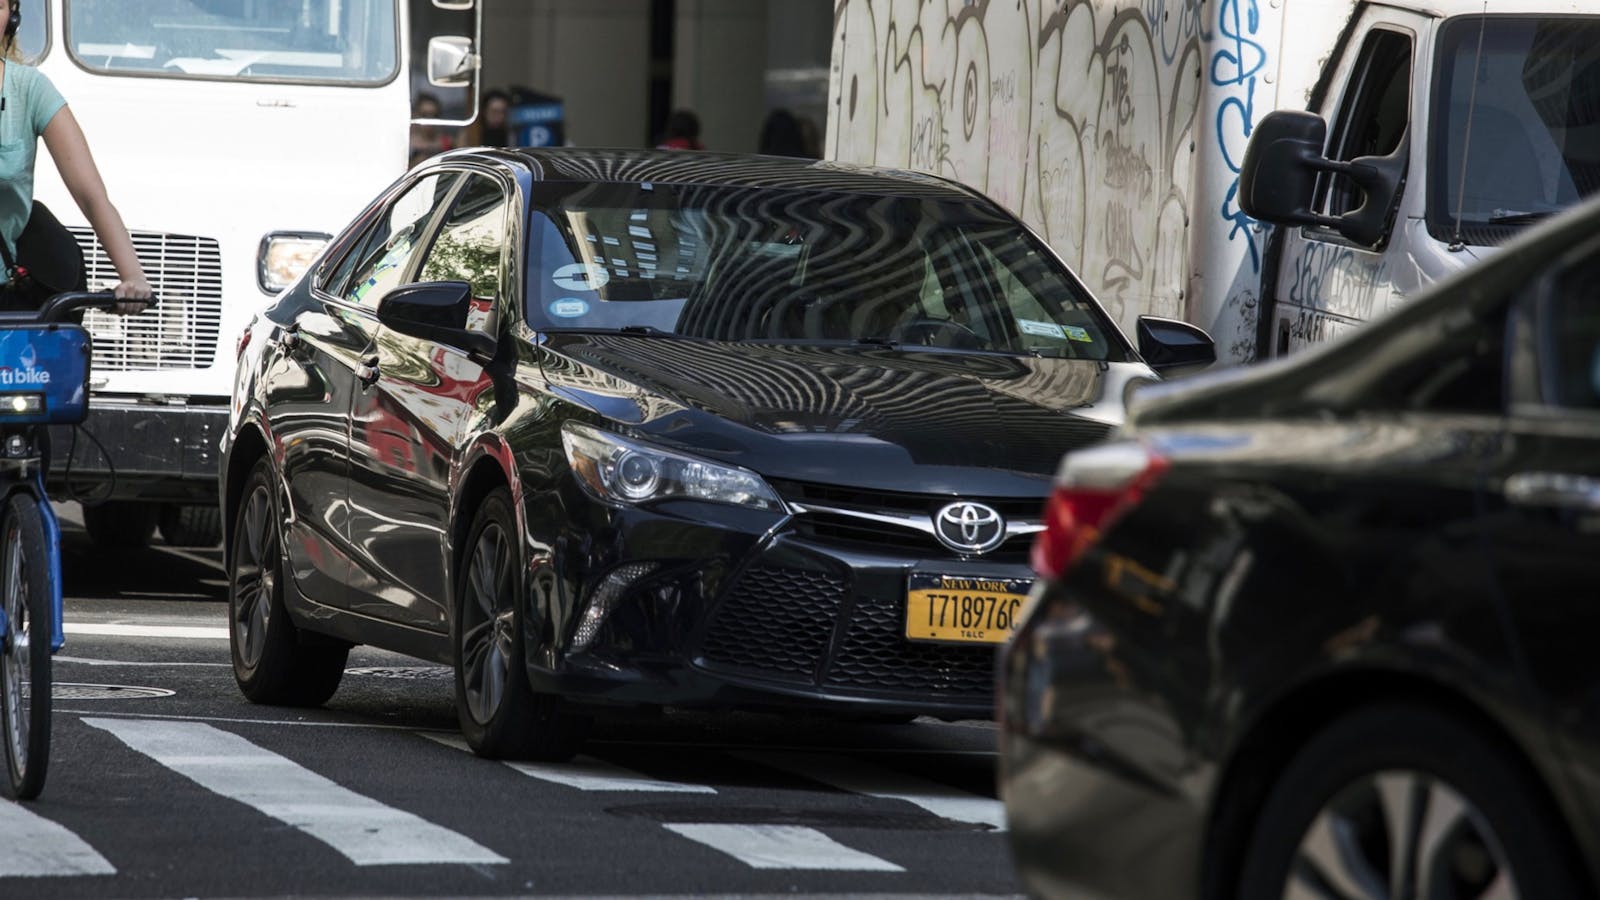 An Uber vehicle in New York City in 2018. Photo: Bloomberg